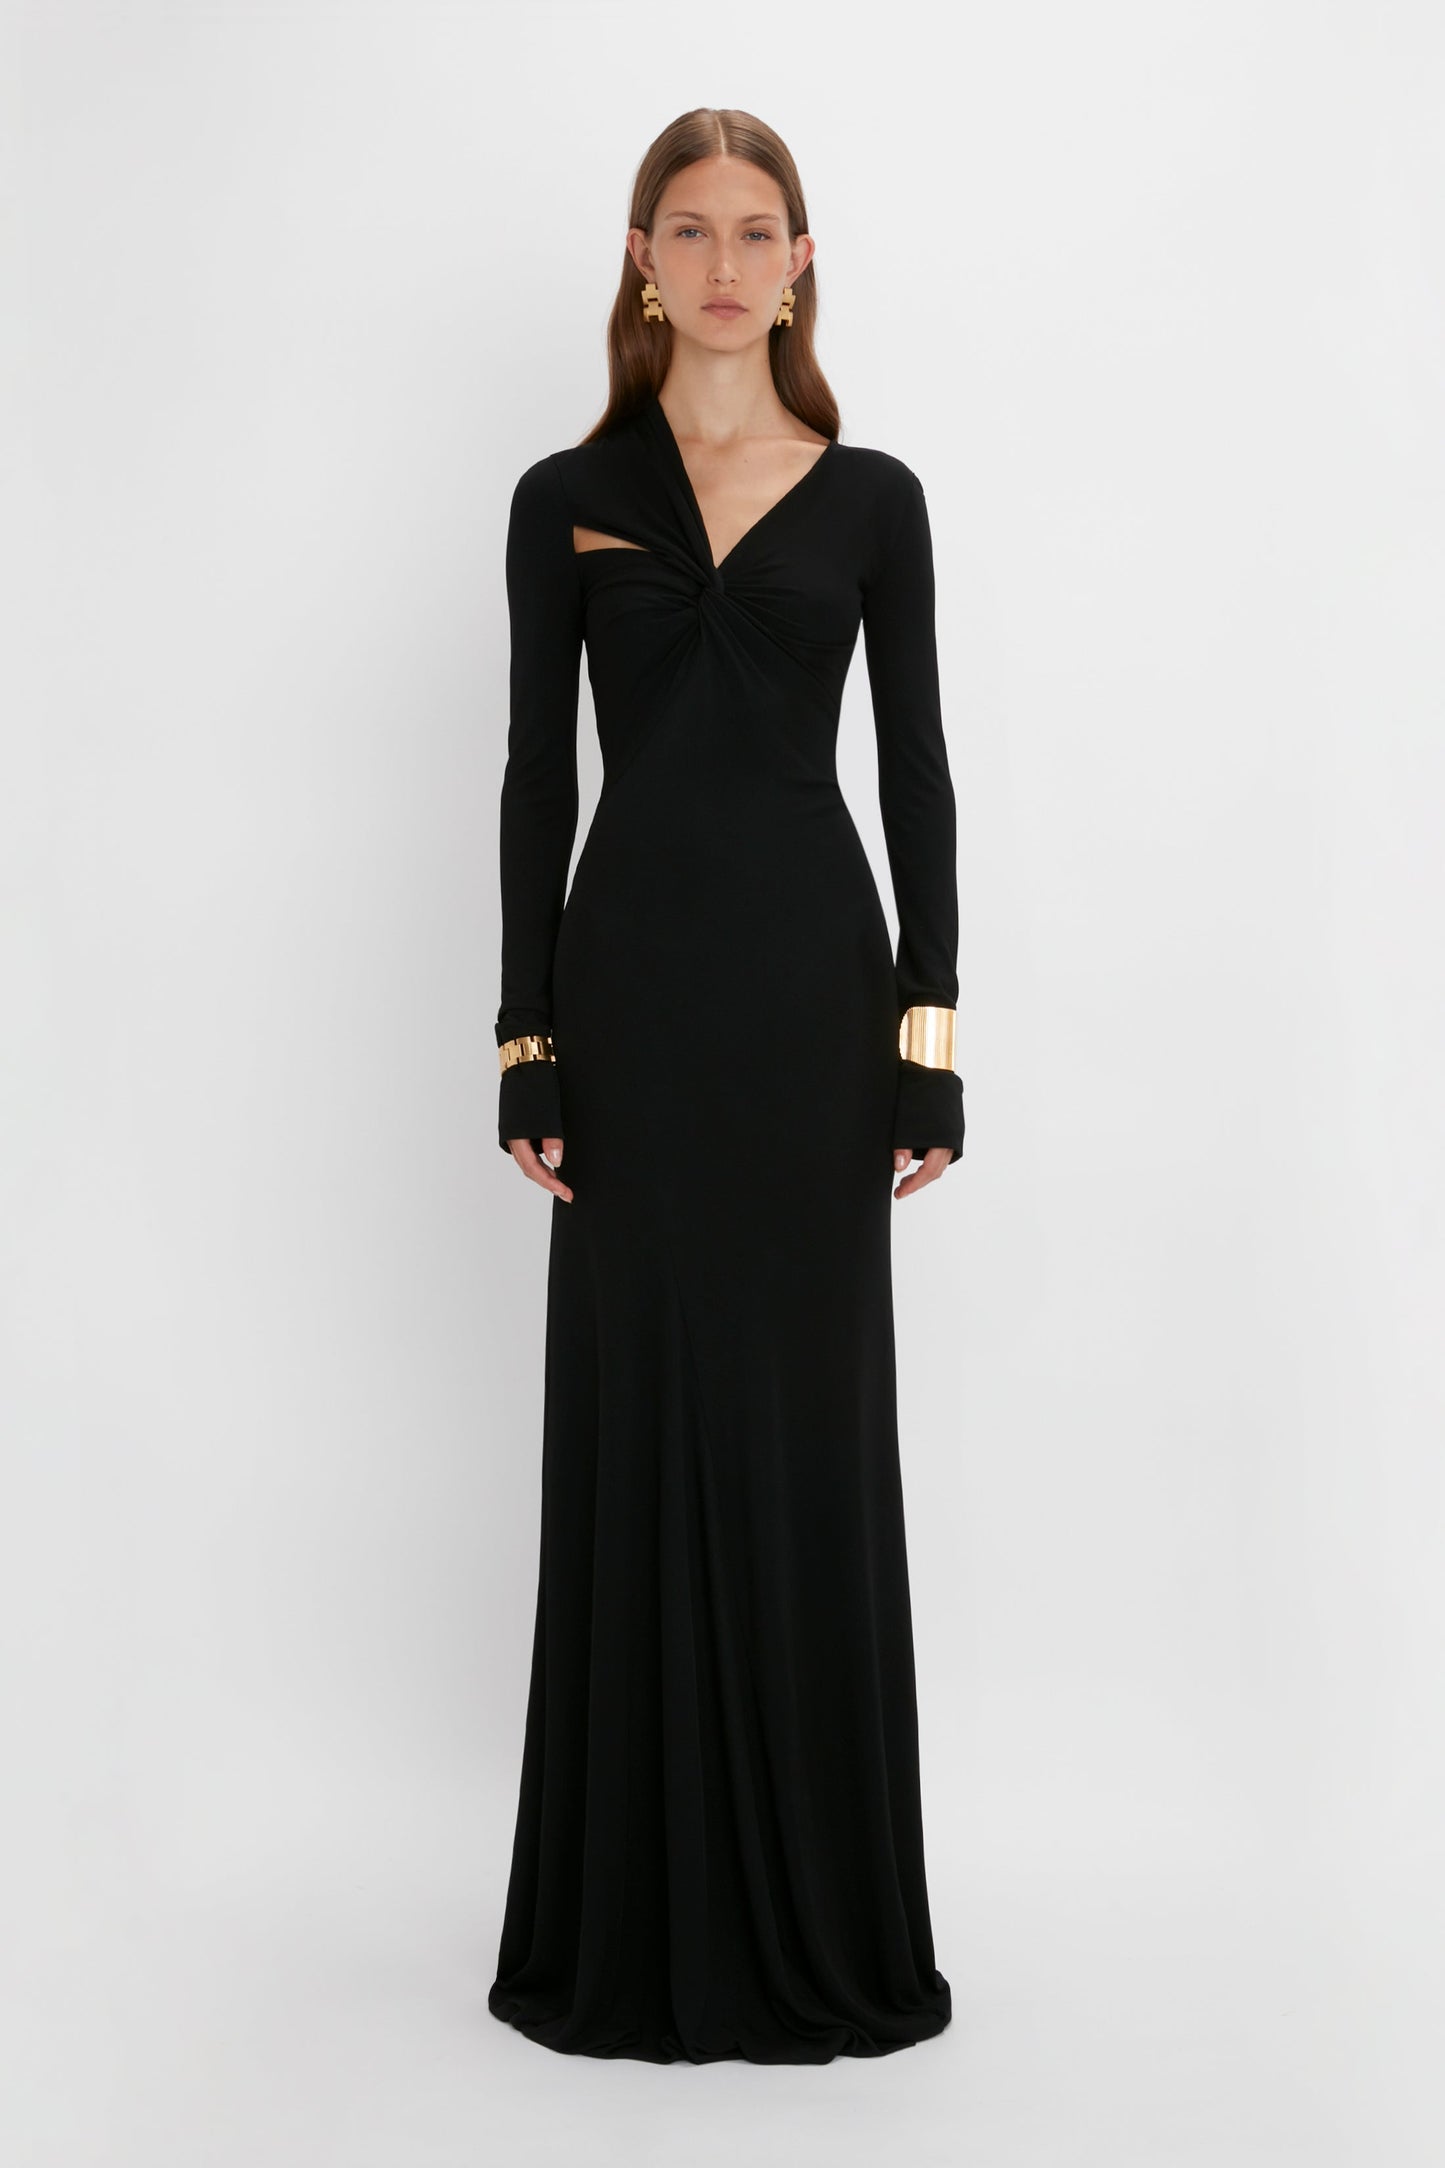 A woman in a black long-sleeve Victoria Beckham floor-length gown with a twisted detail at the chest, accessorized with gold earrings and bracelets, standing against a white background.